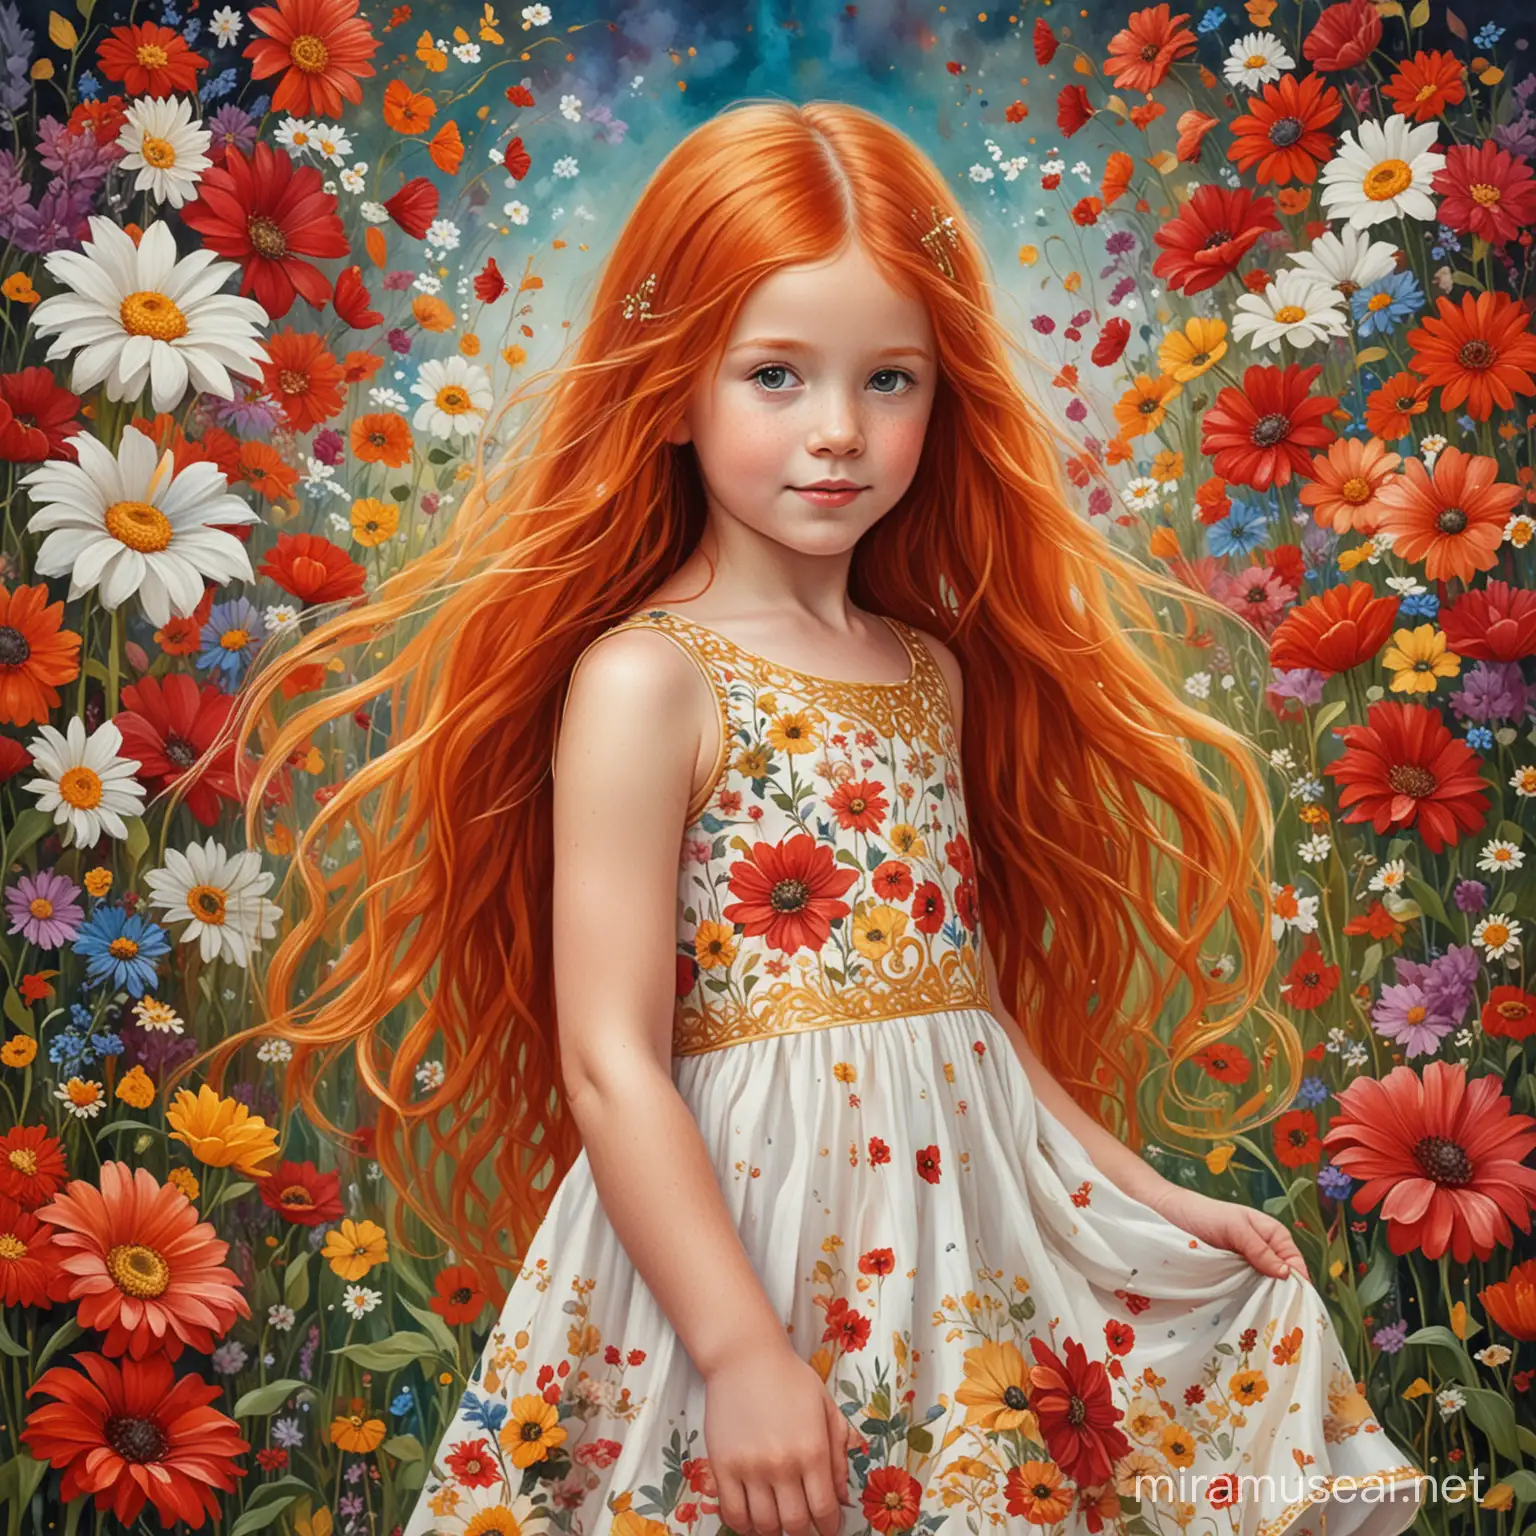 Whimsical Portrait of a RedHaired Girl Amidst Colorful Flowers and Gold Accents